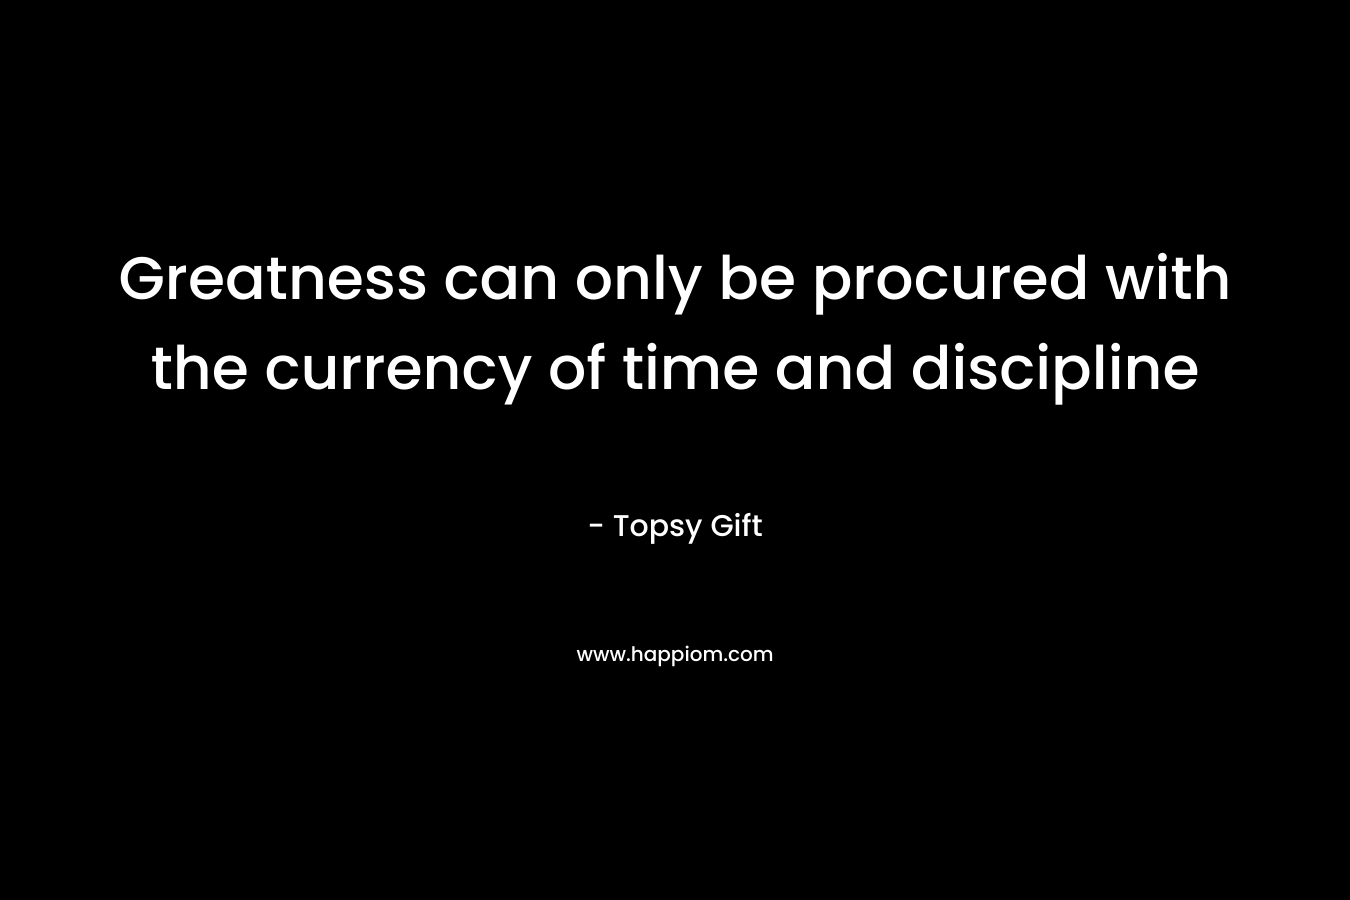 Greatness can only be procured with the currency of time and discipline – Topsy Gift